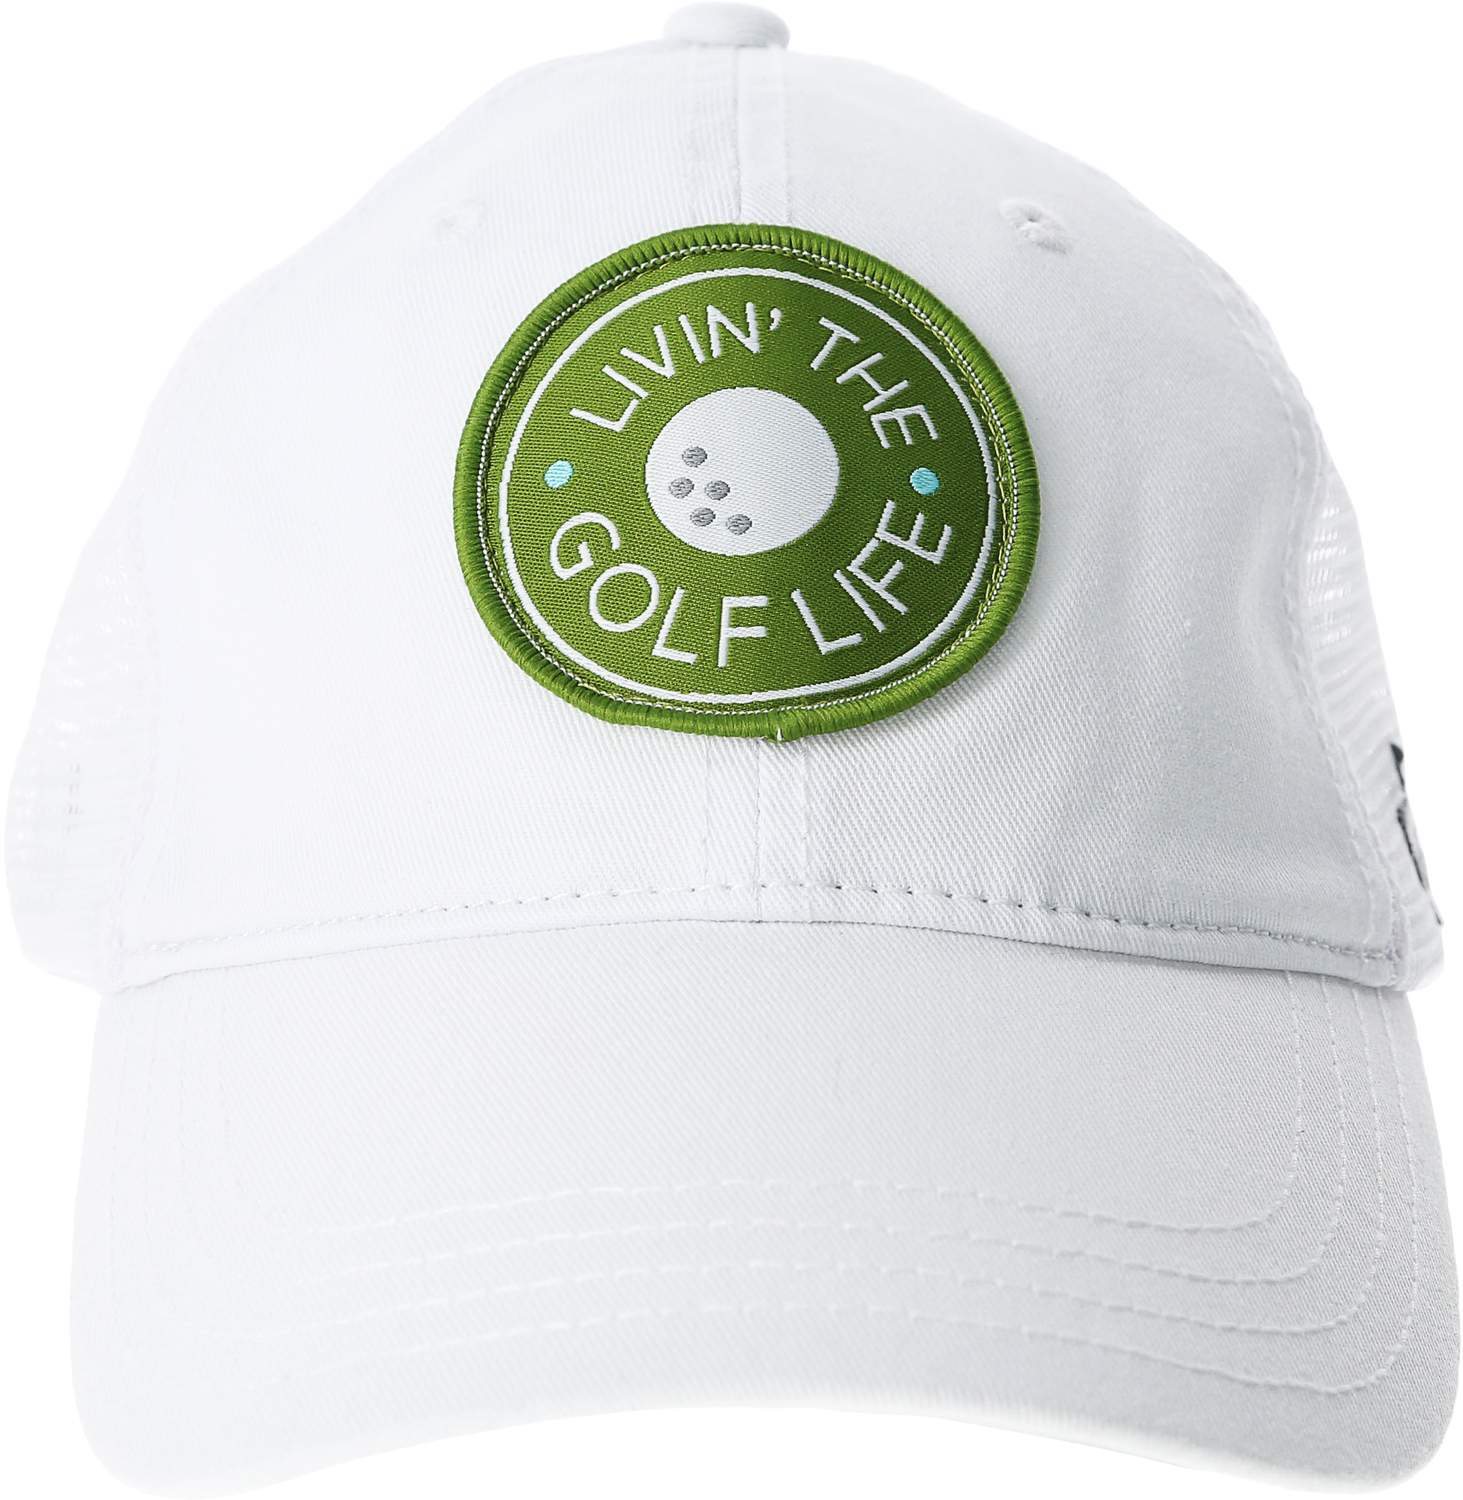 Golf Life by We People - Golf Life - White Adjustable Mesh Hat